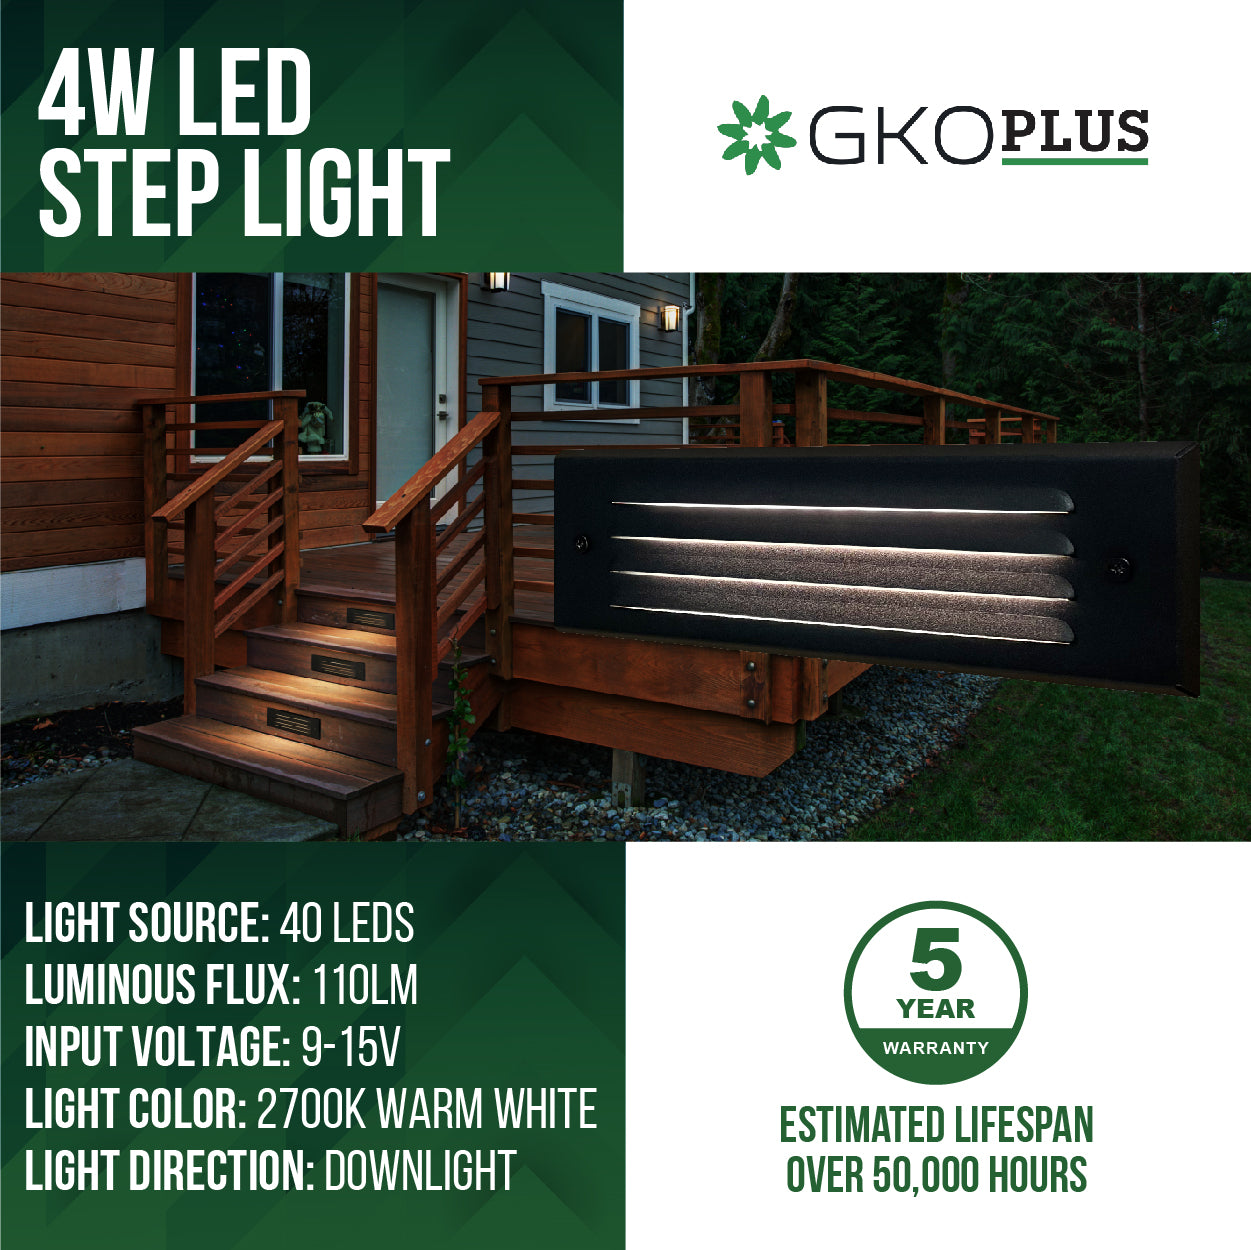 Low Voltage Louvered Step Light, 4W 12V Surface Mount, IP65,  9.37" x 2.87" x 0.55"